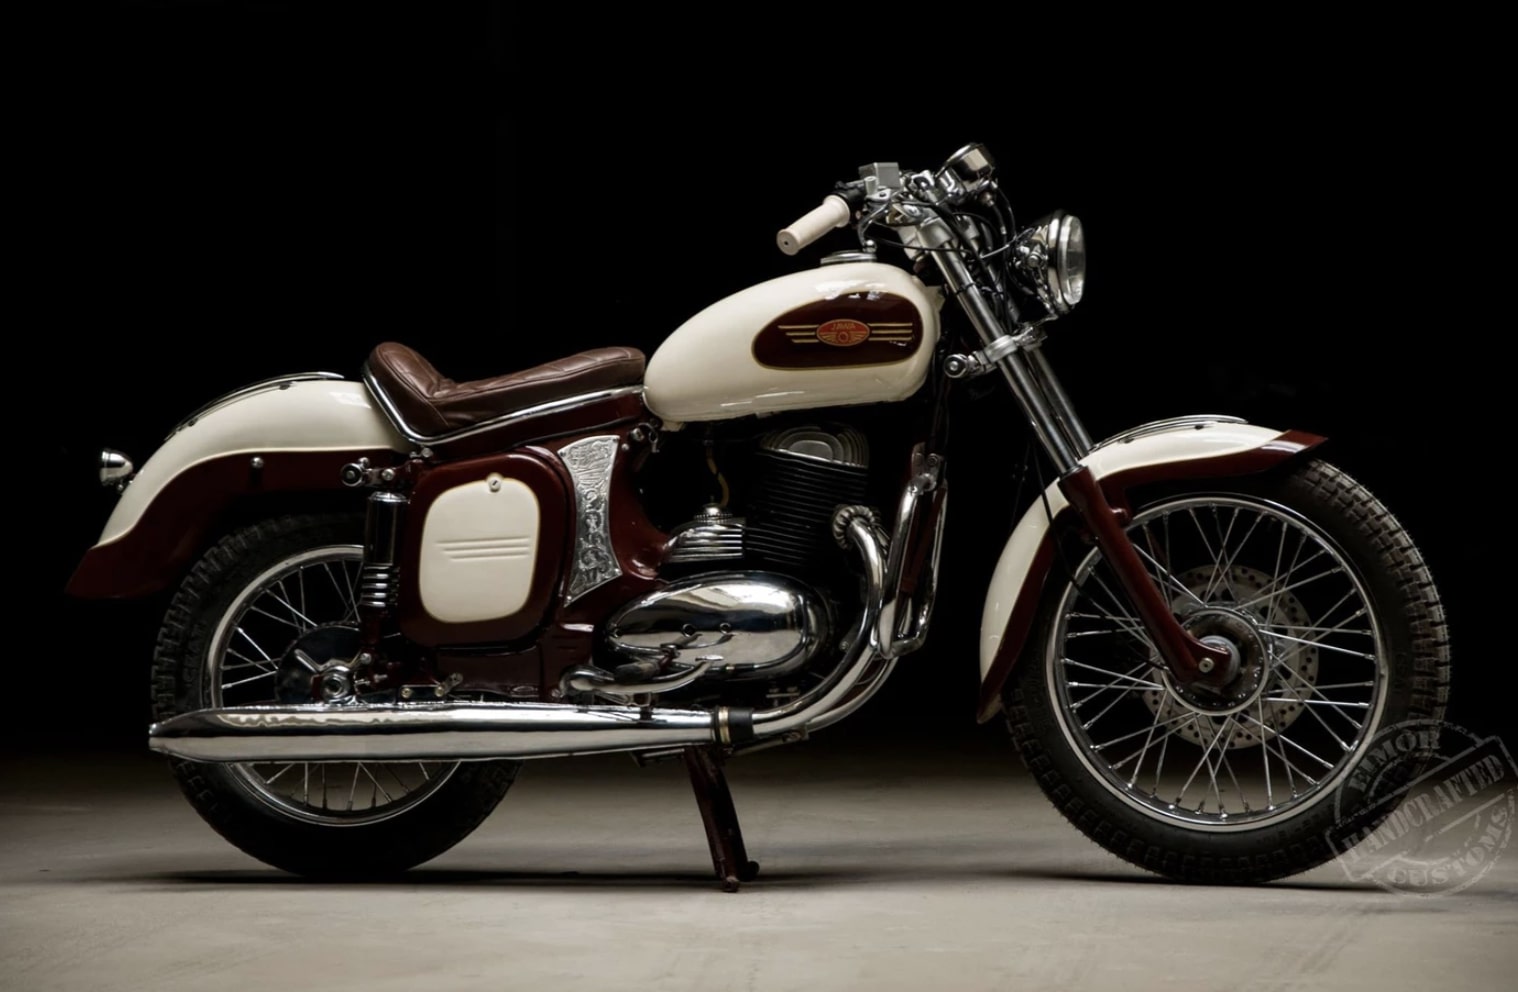 250cc Classic Jawa Motorcycle Quick Details and Live Photos - snap